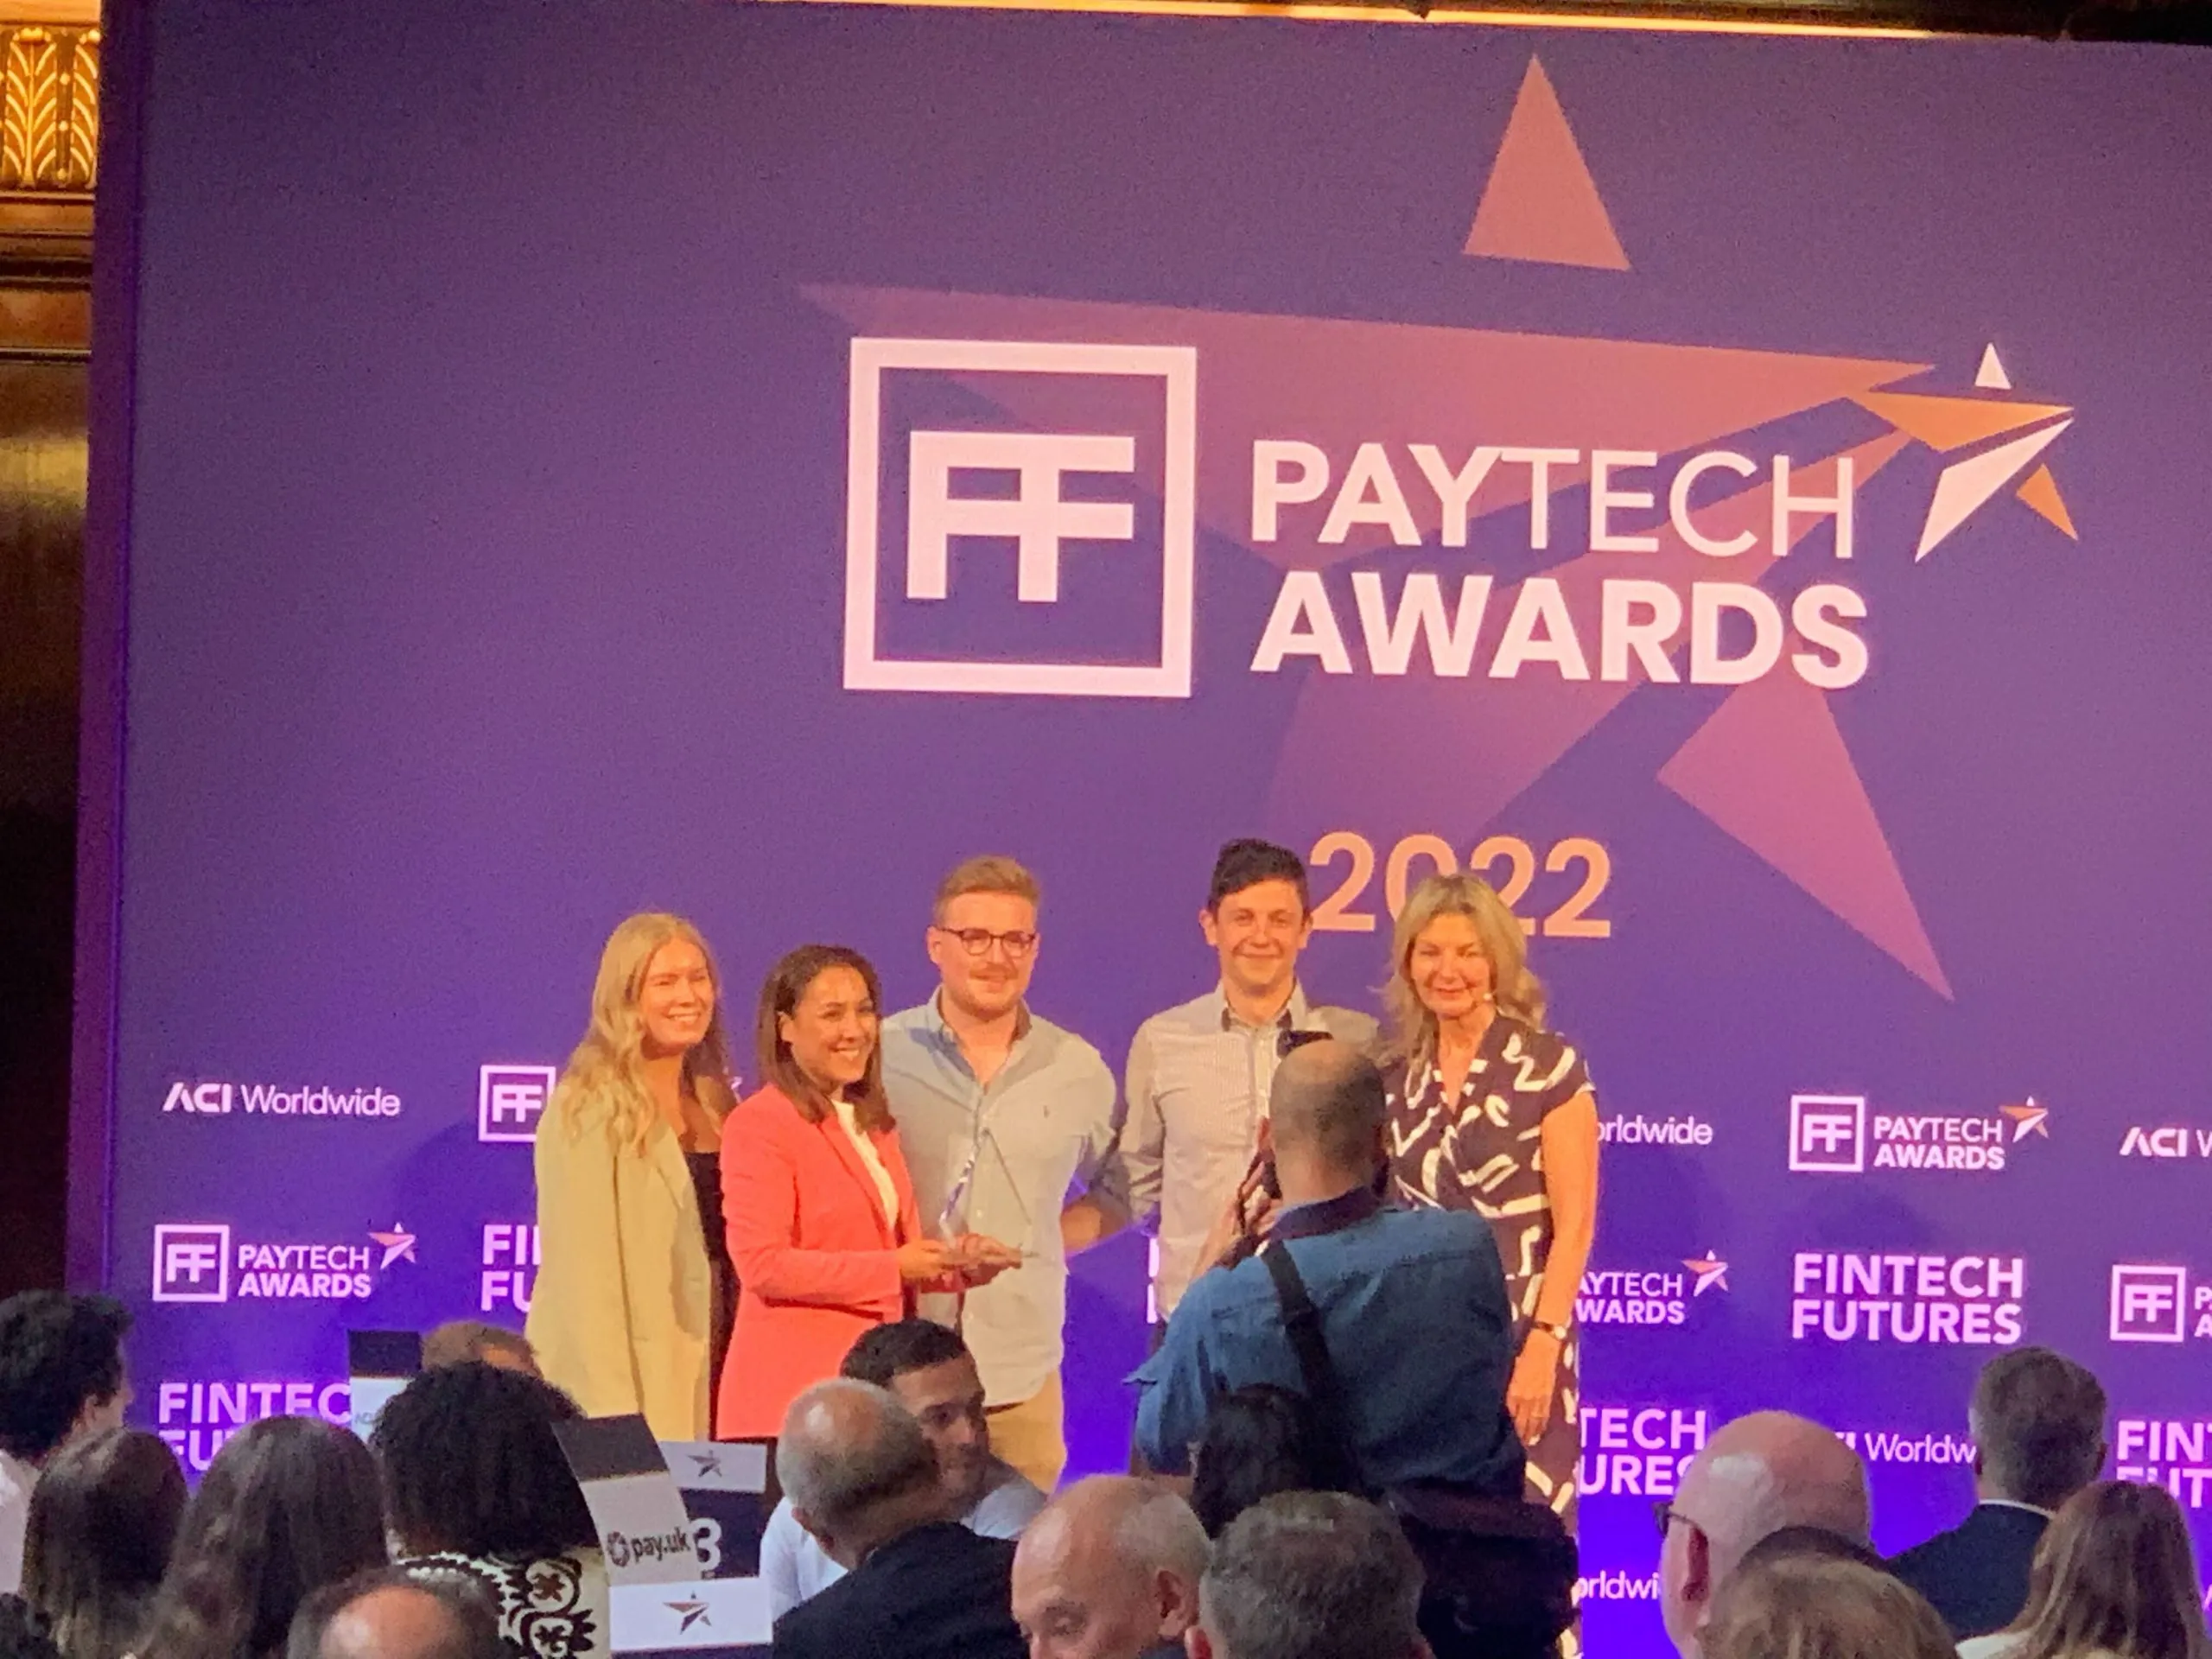 Image for Pleo and Enfuce win the Best Corporate Cards Initiative at the PayTech Awards